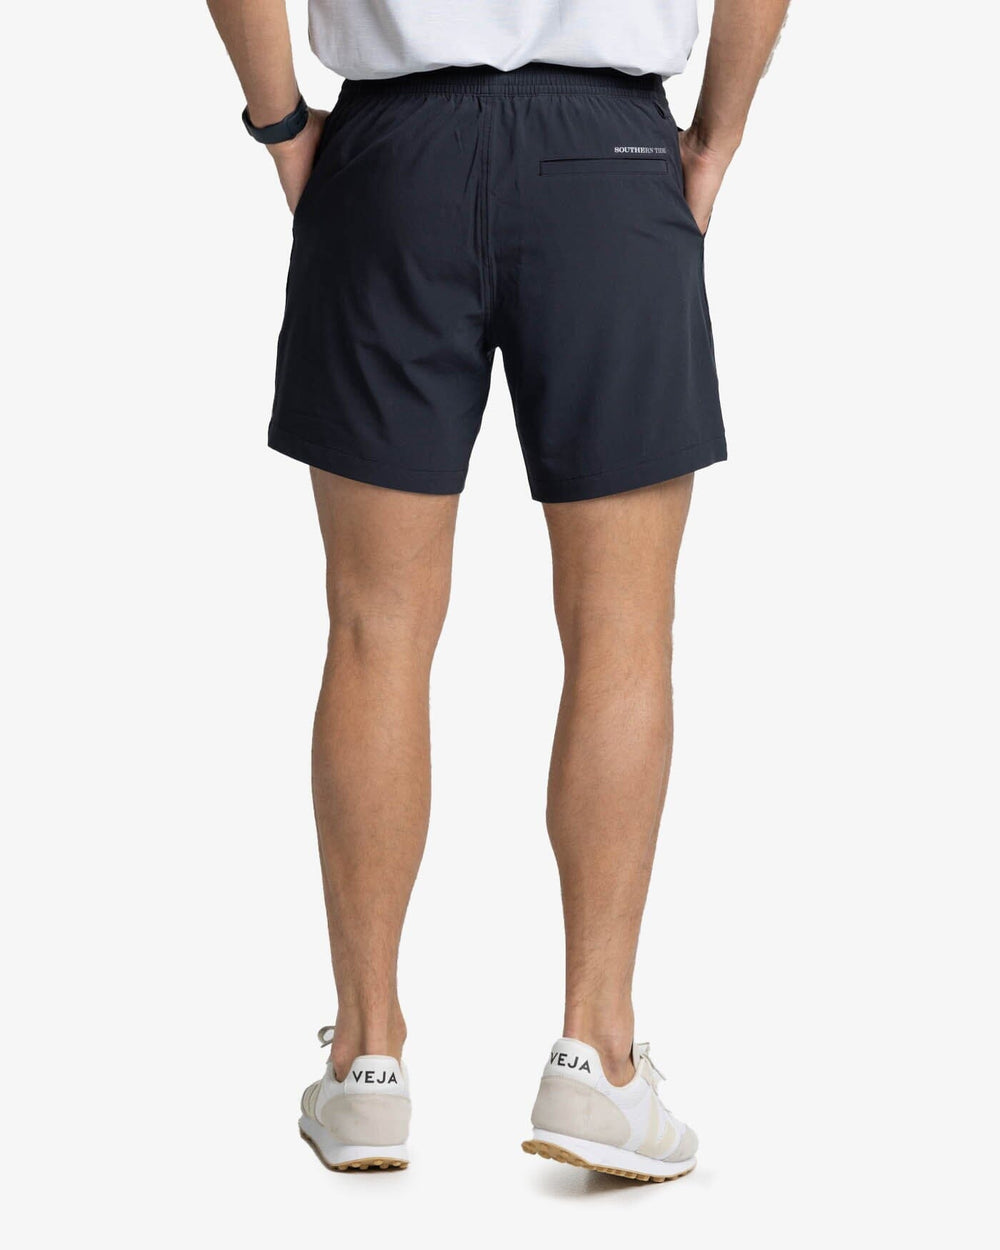 The back view of the Southern Tide Rip Channel 6 Inch Performance Short by Southern Tide - Caviar Black